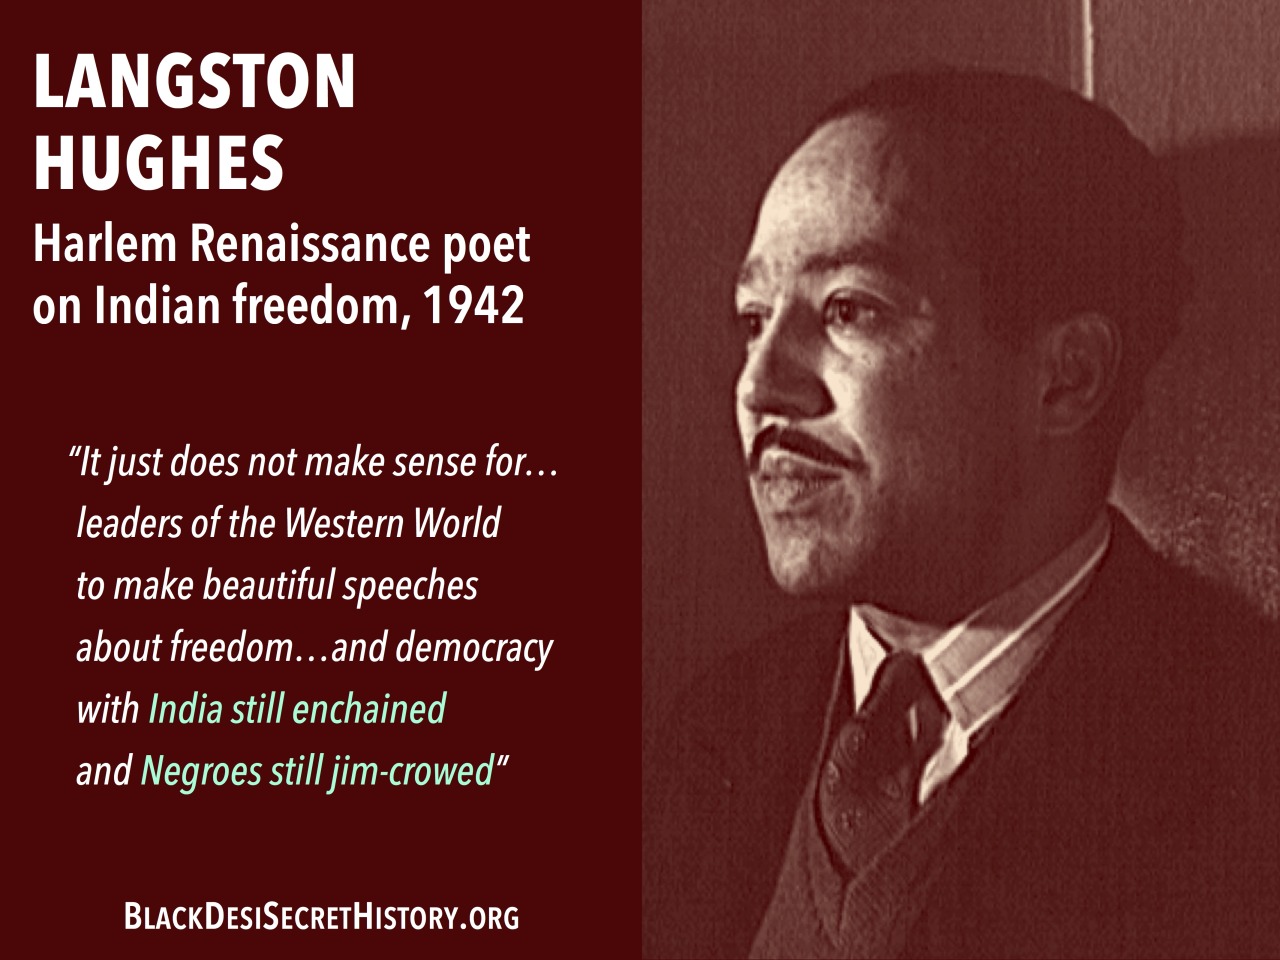 LANGSTON HUGHES, Harlem Renaissance poet on Indian freedom, 1942: “It just does not make sense for…leaders of the Western World to make beautiful speeches about freedom…and democracy with India still enchained and Negroes still jim-crowed”